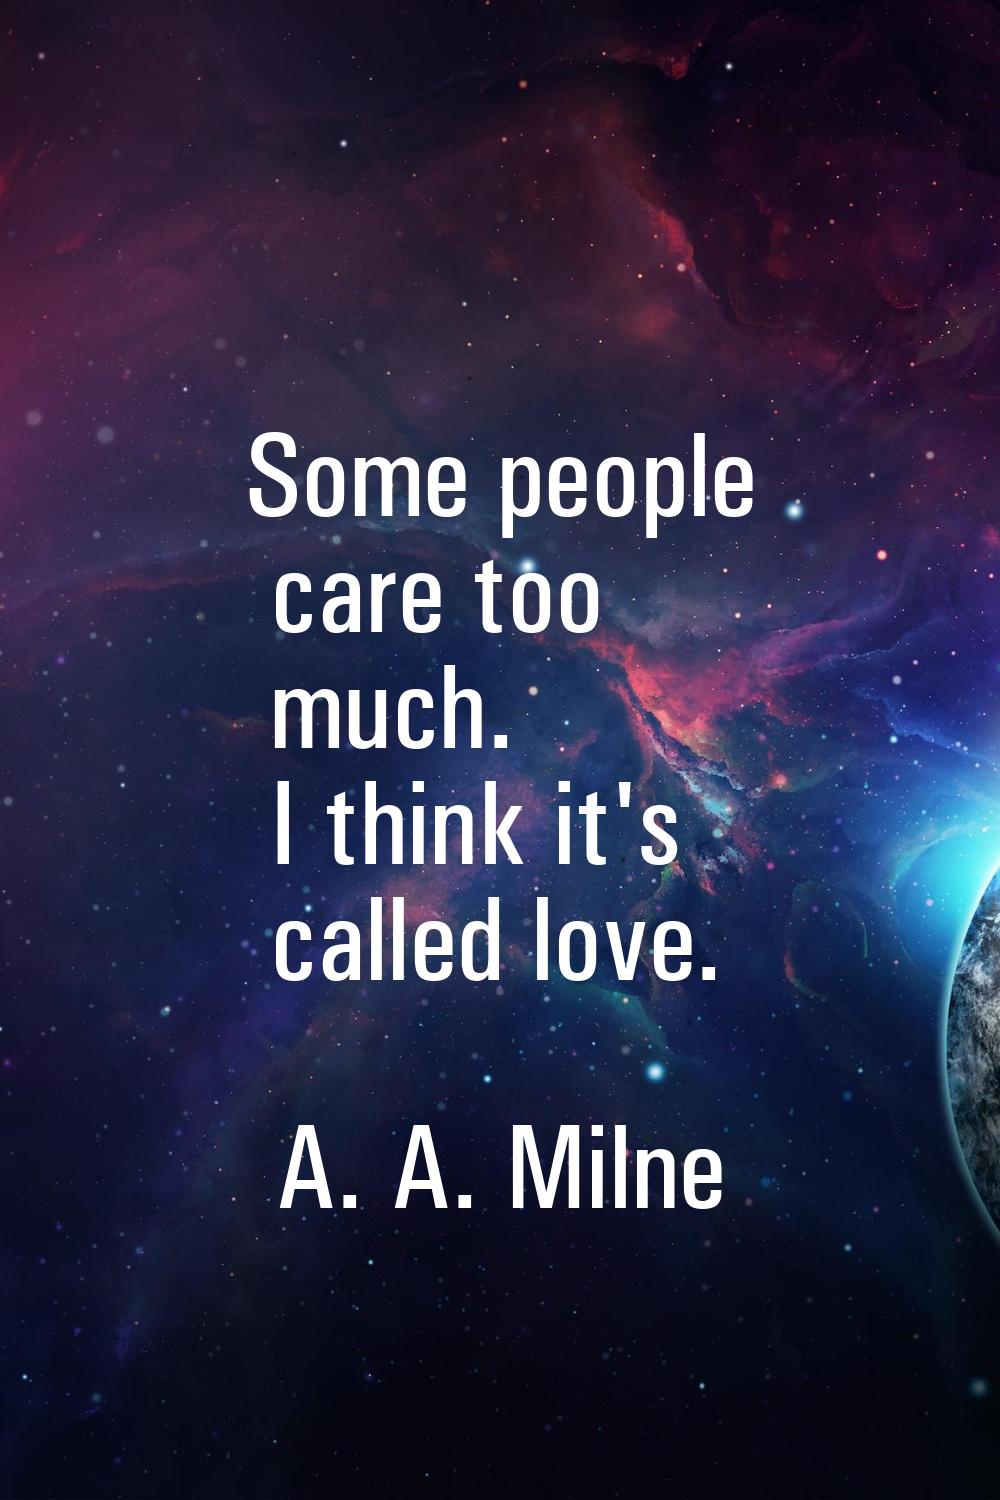 Some people care too much. I think it's called love.